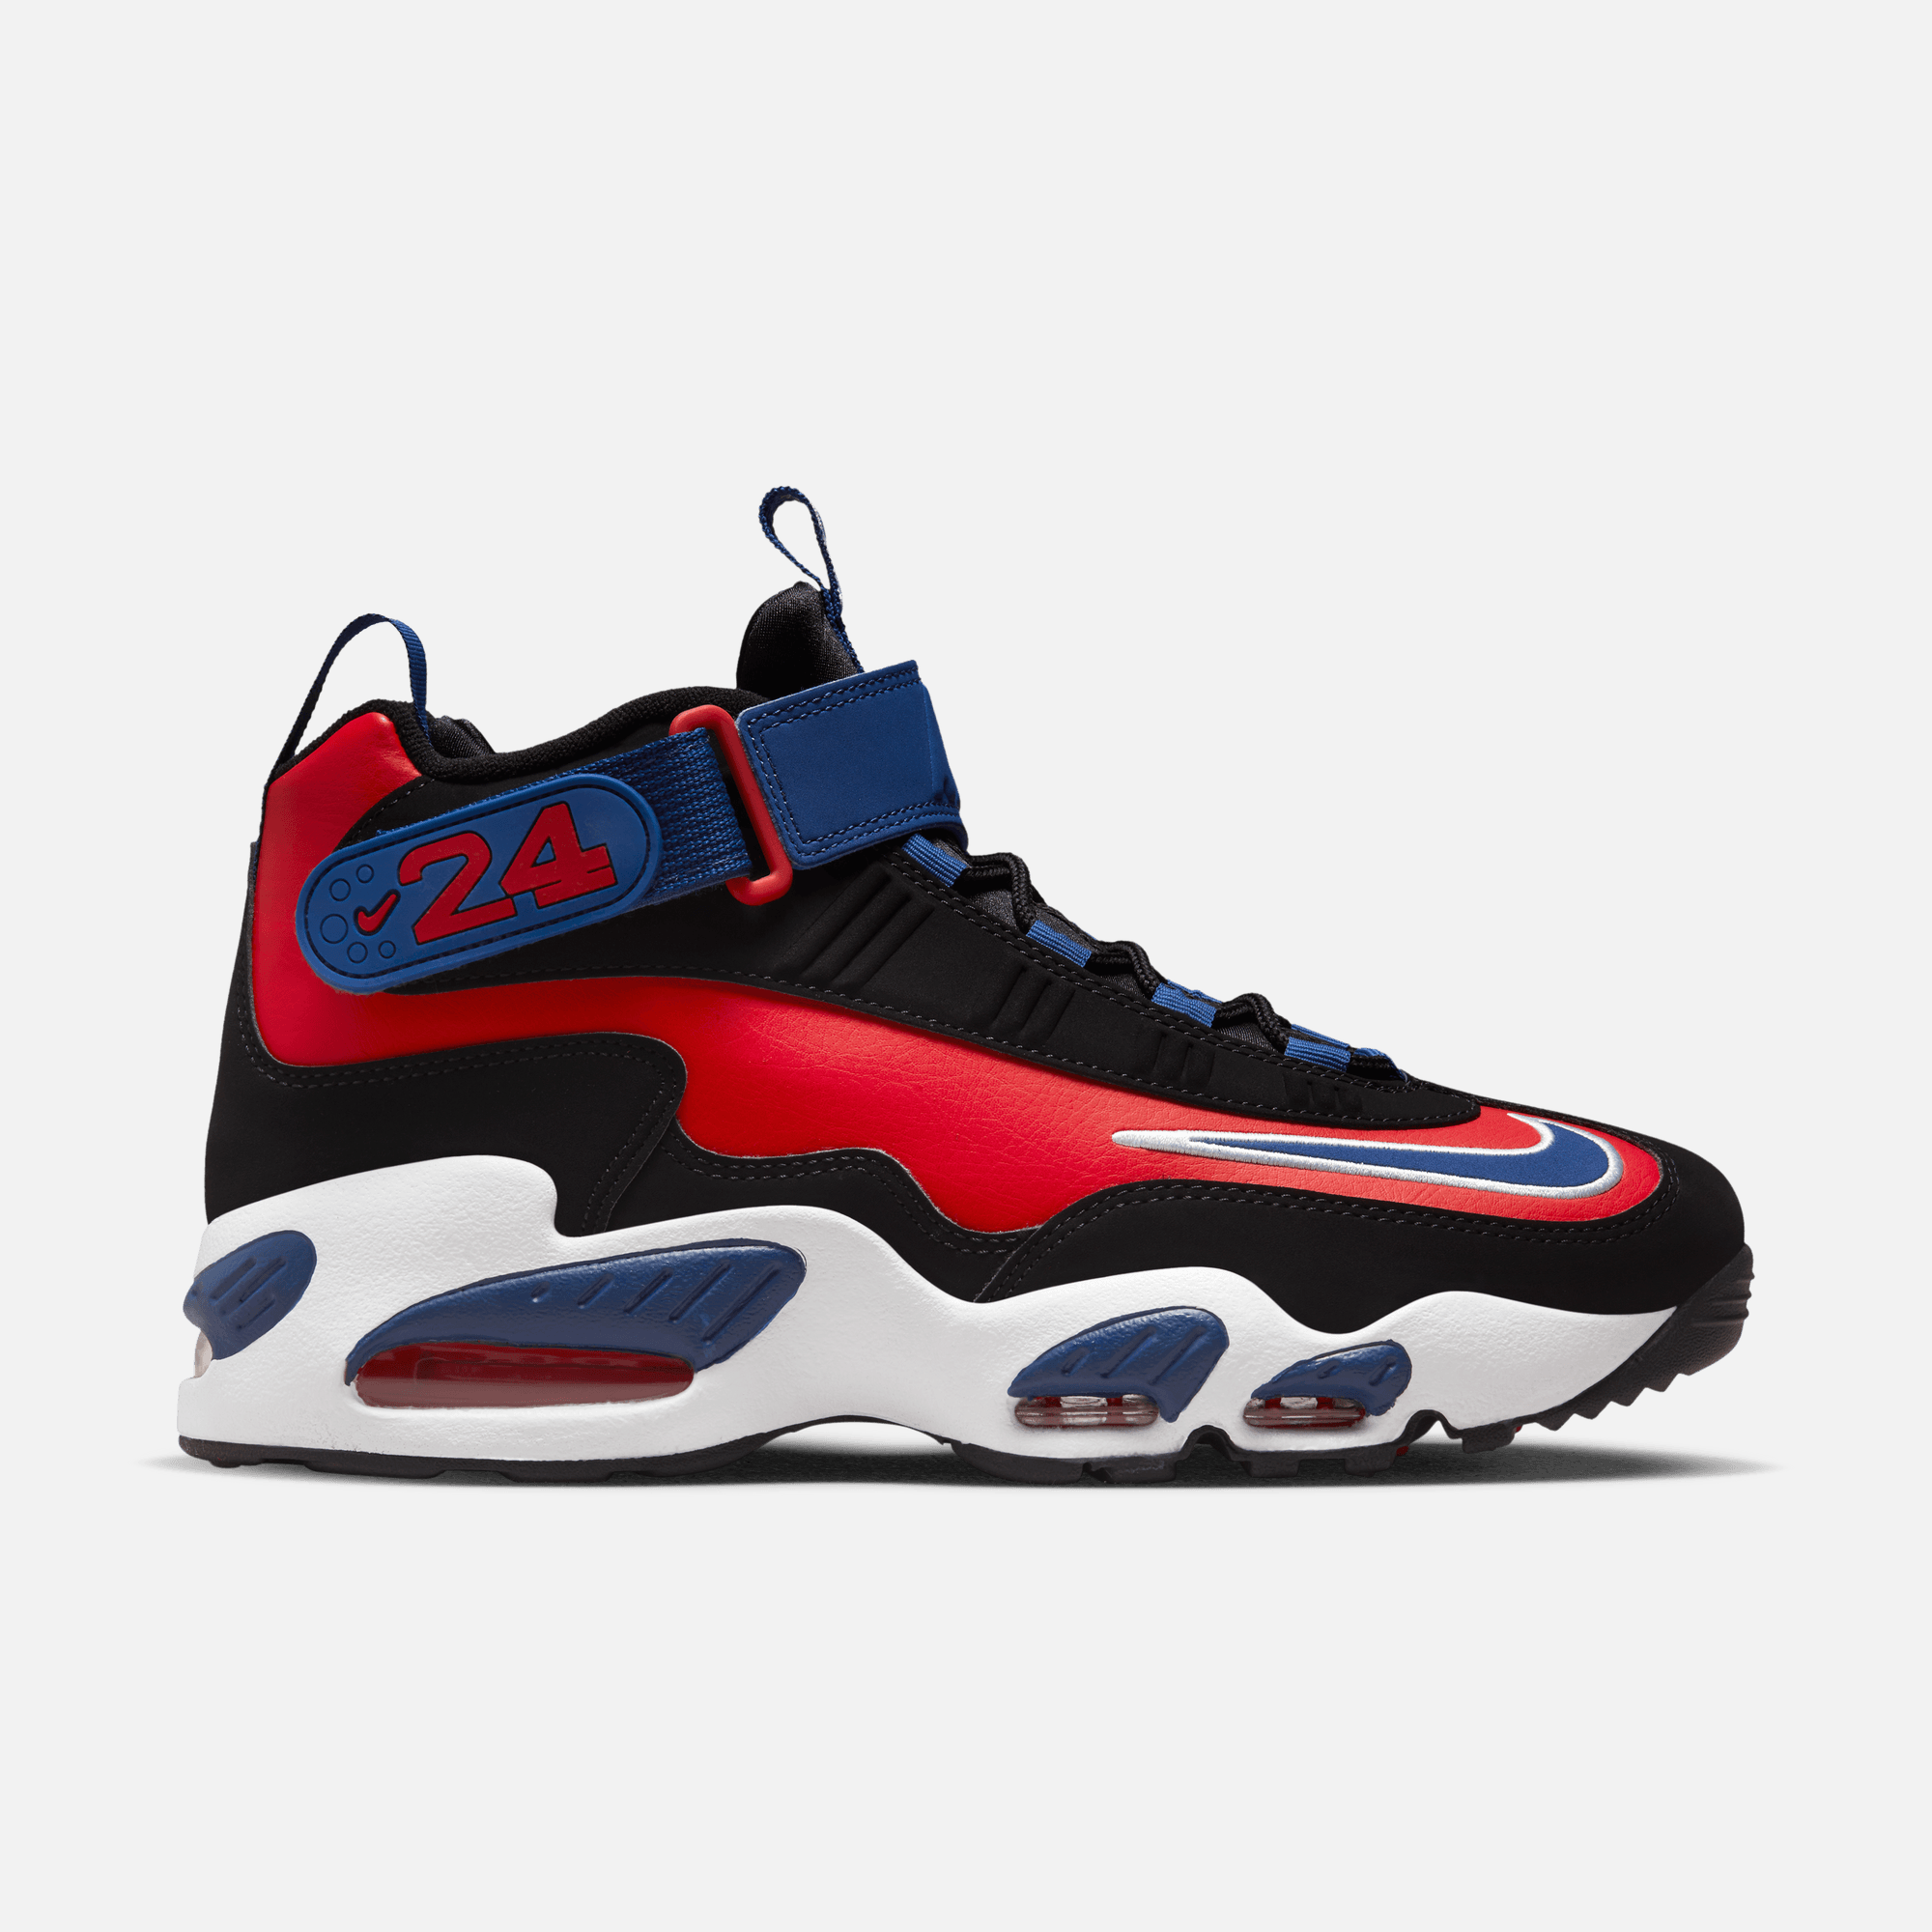 Nike Air Griffey Max 1 – 'Sport Red